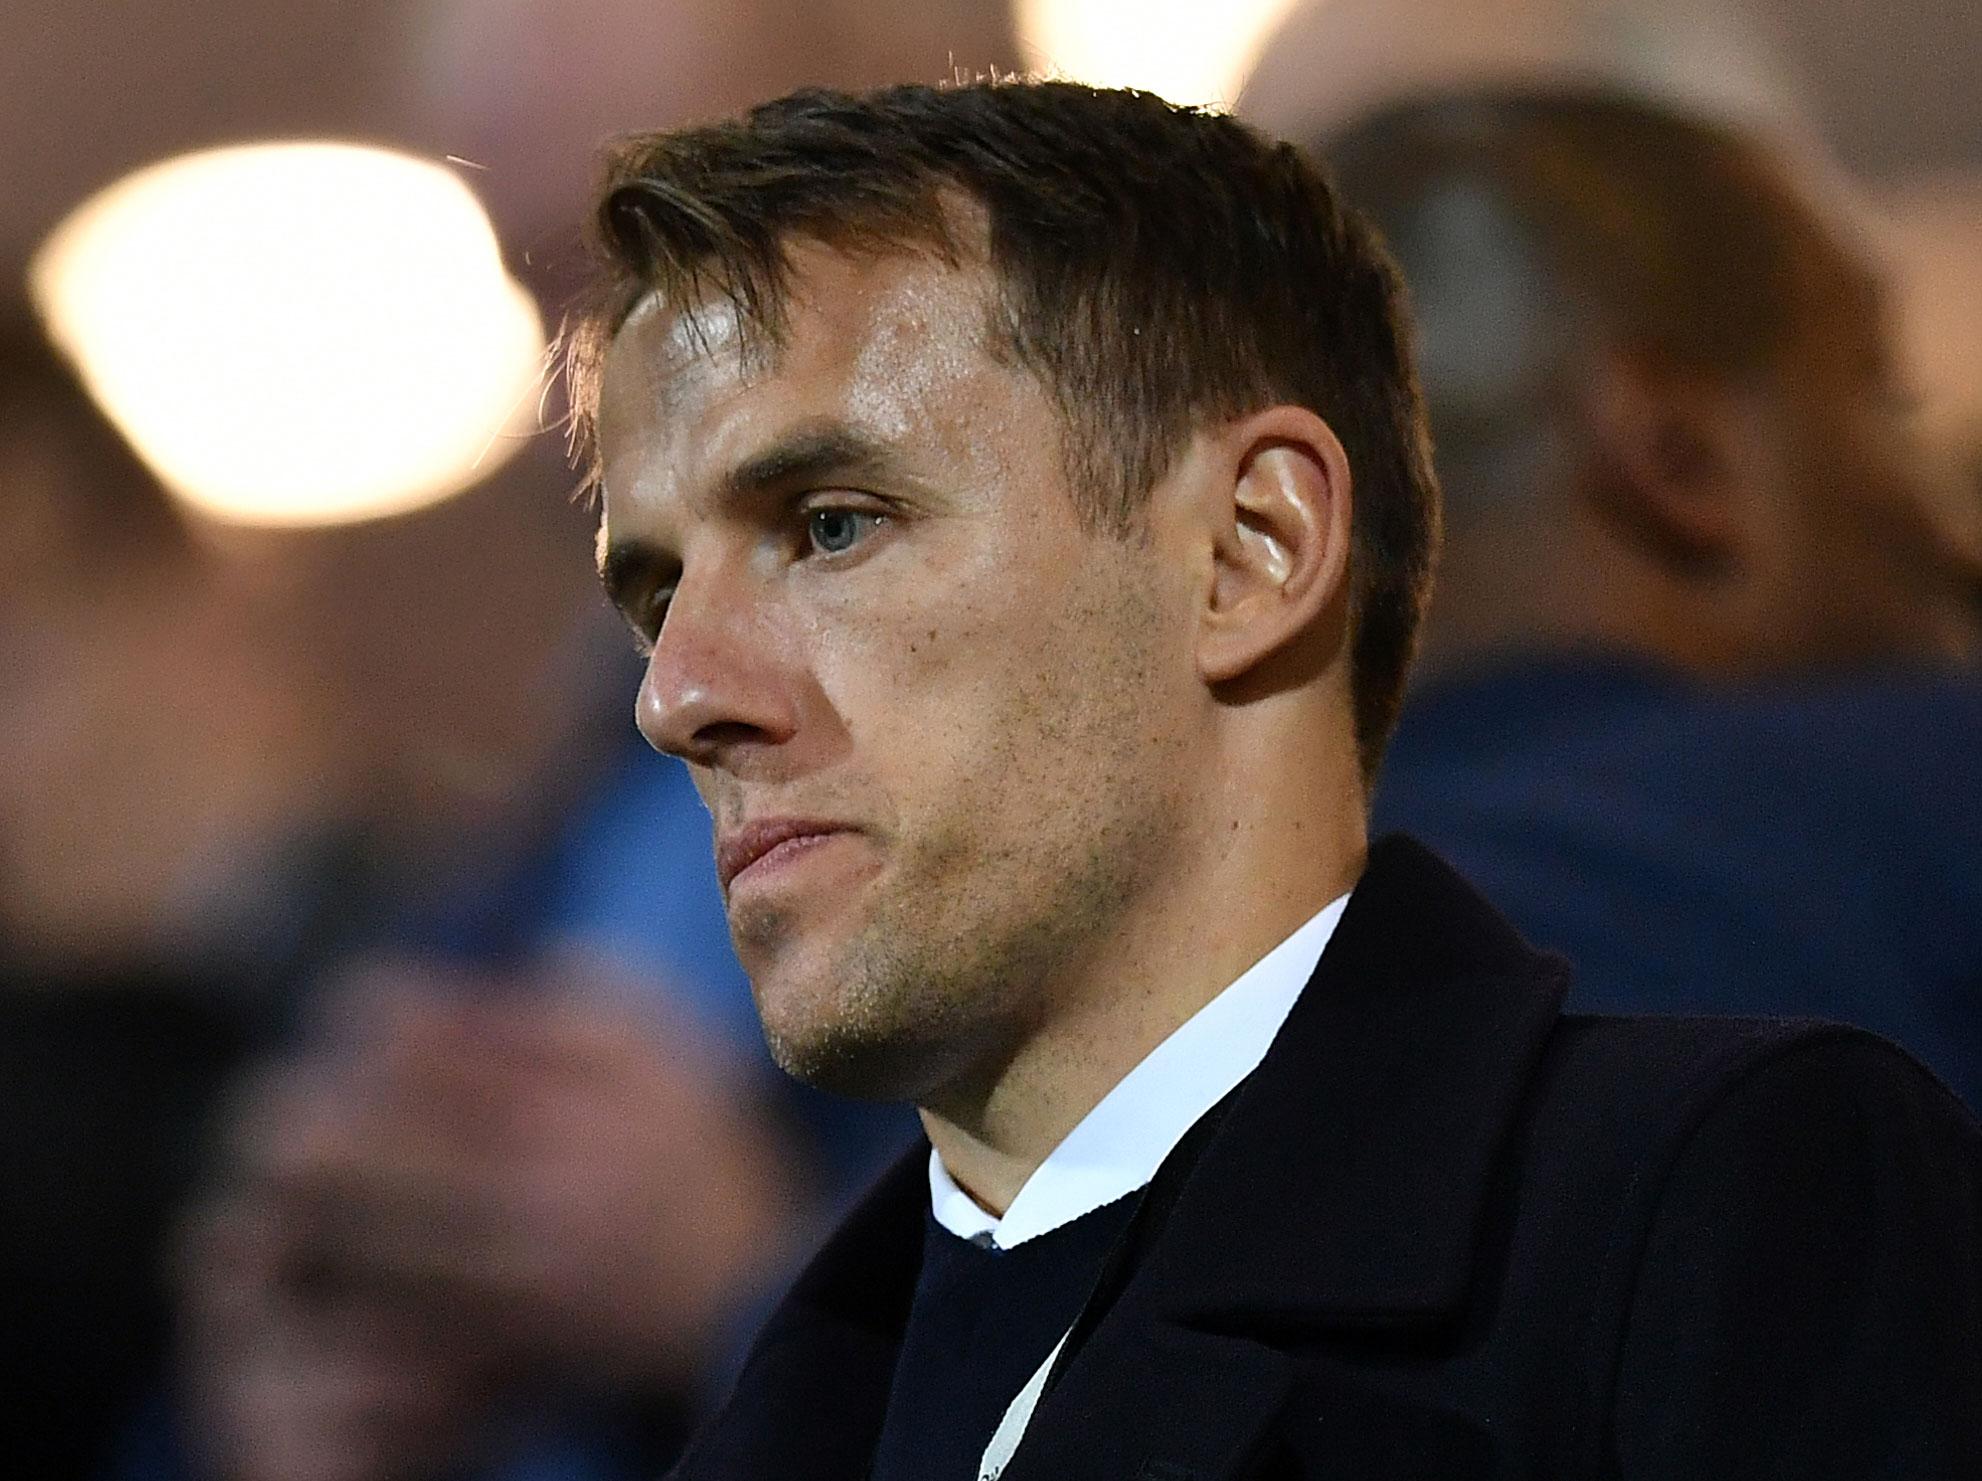 Phil Neville deleted his Twitter account after being appointed as England Women's boss